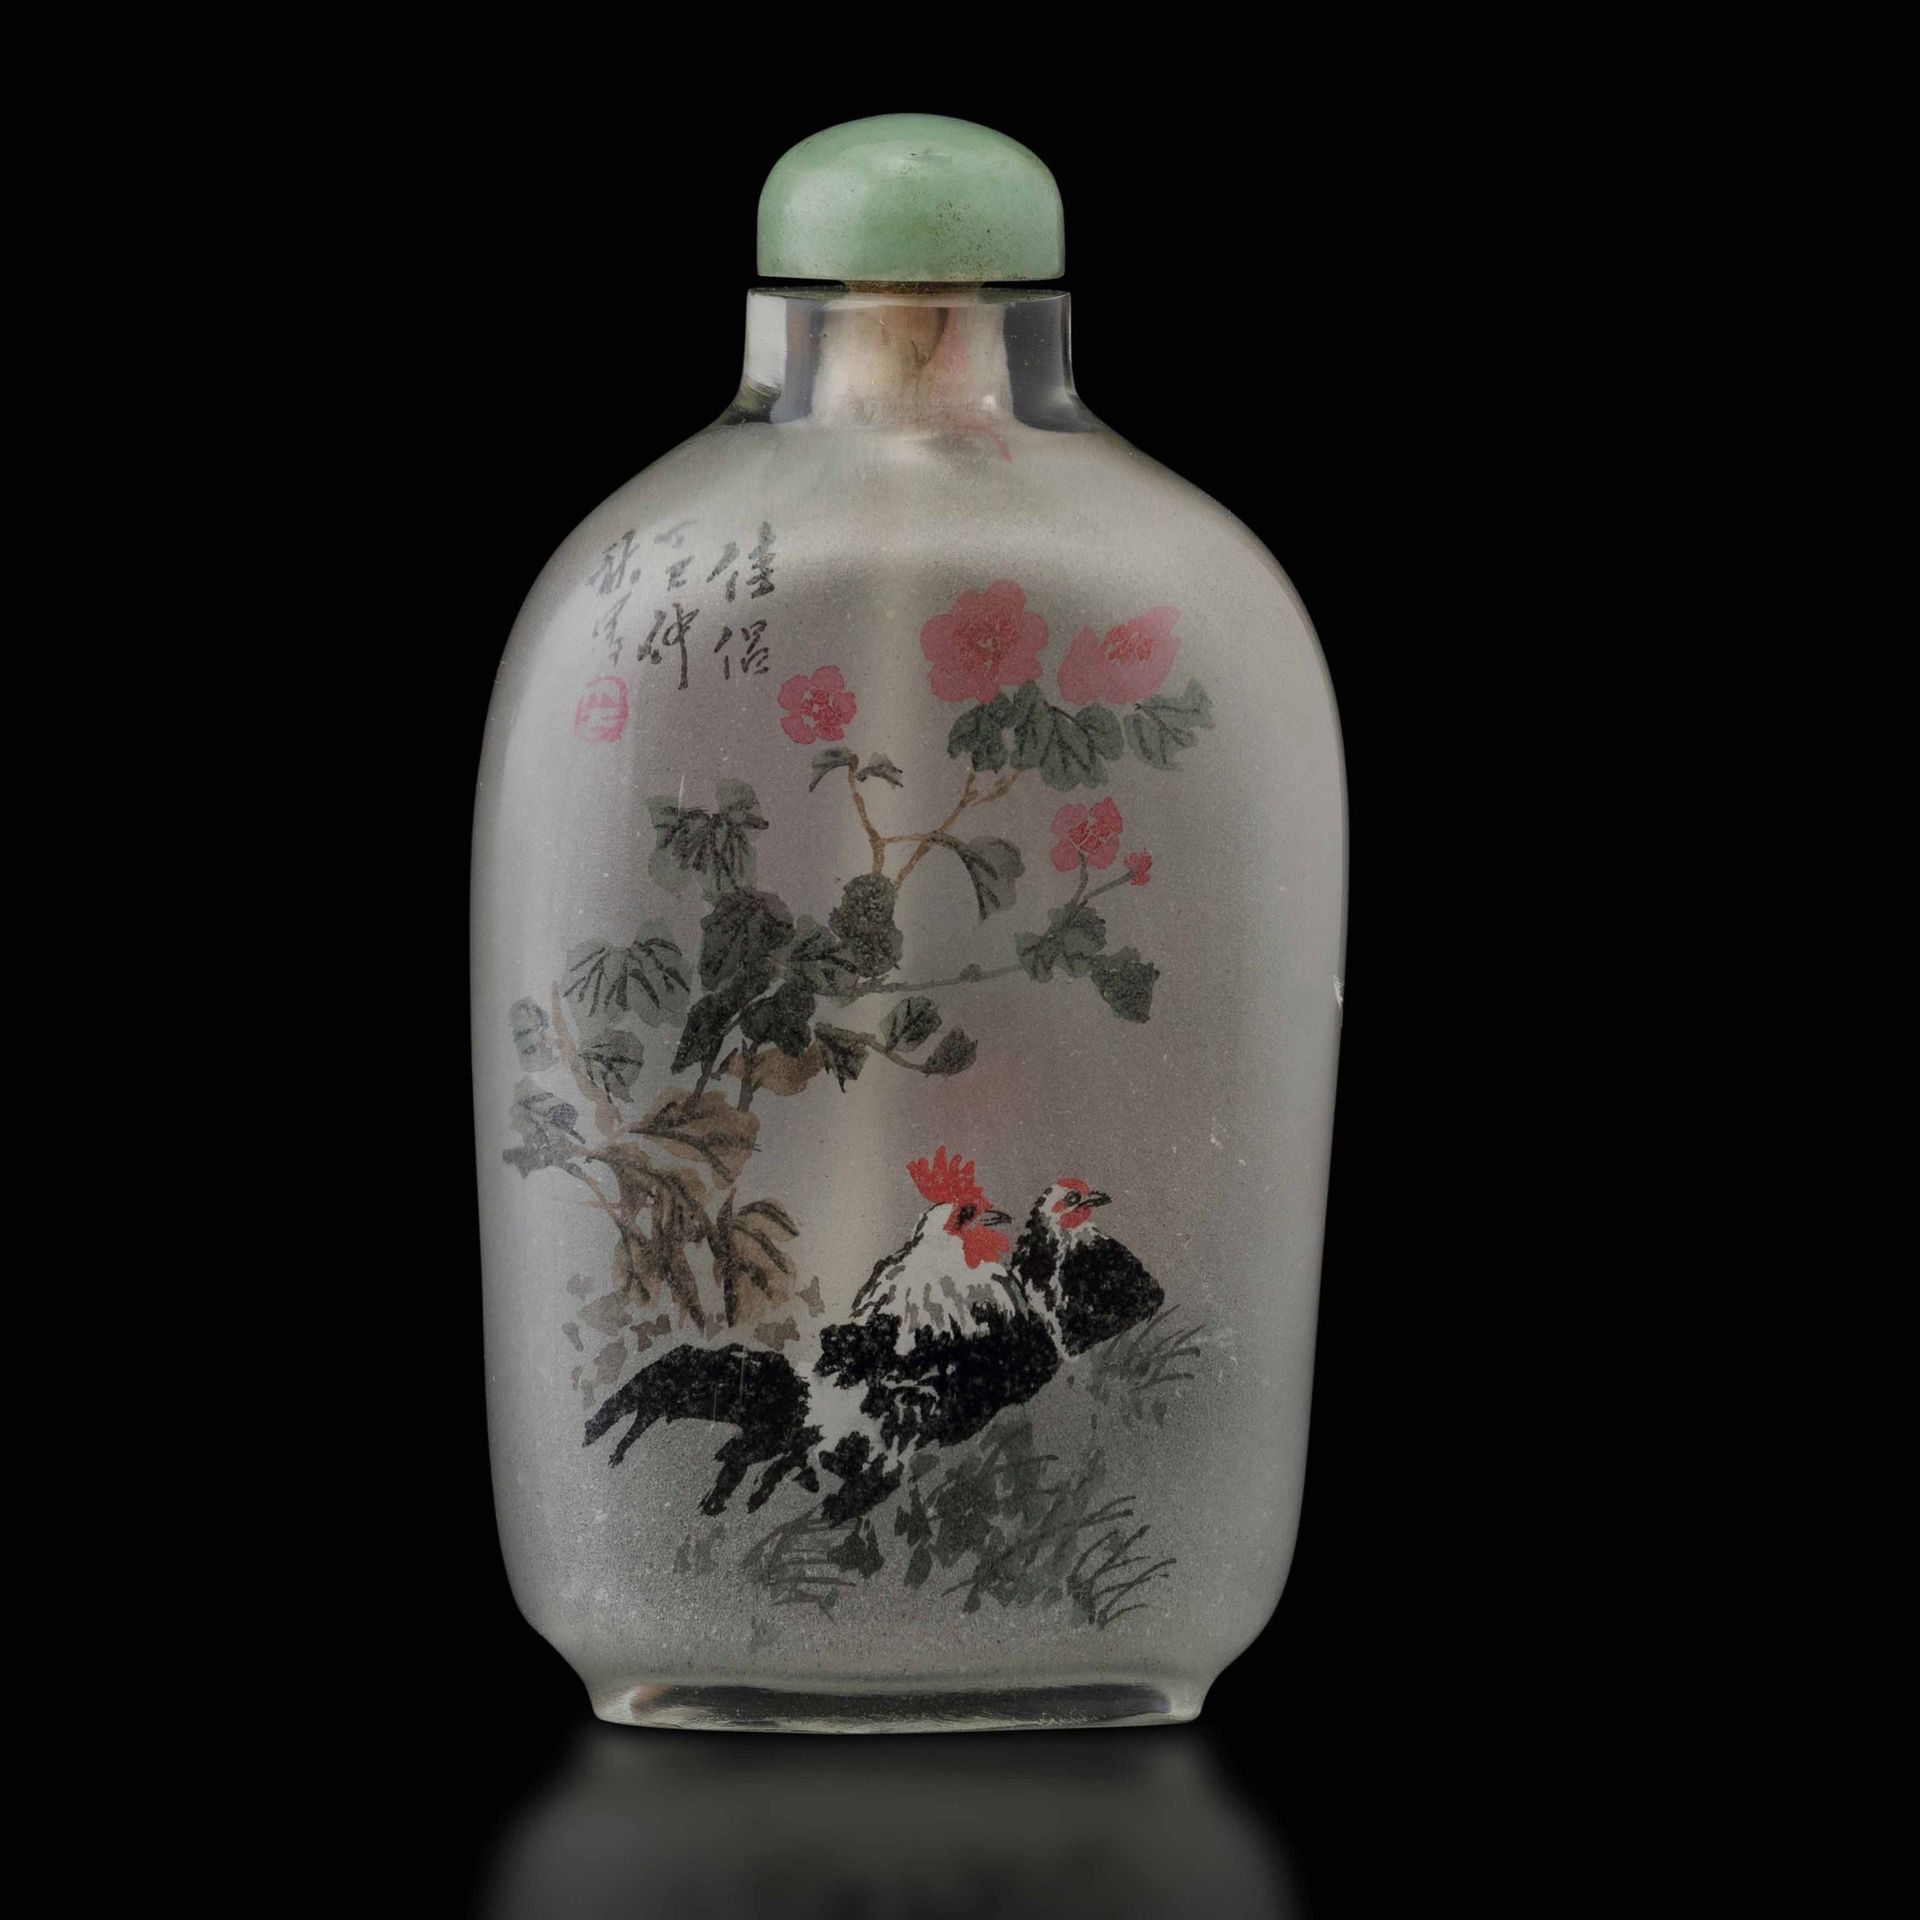 A glass snuff bottle, China, early 1900s H 8,5cm